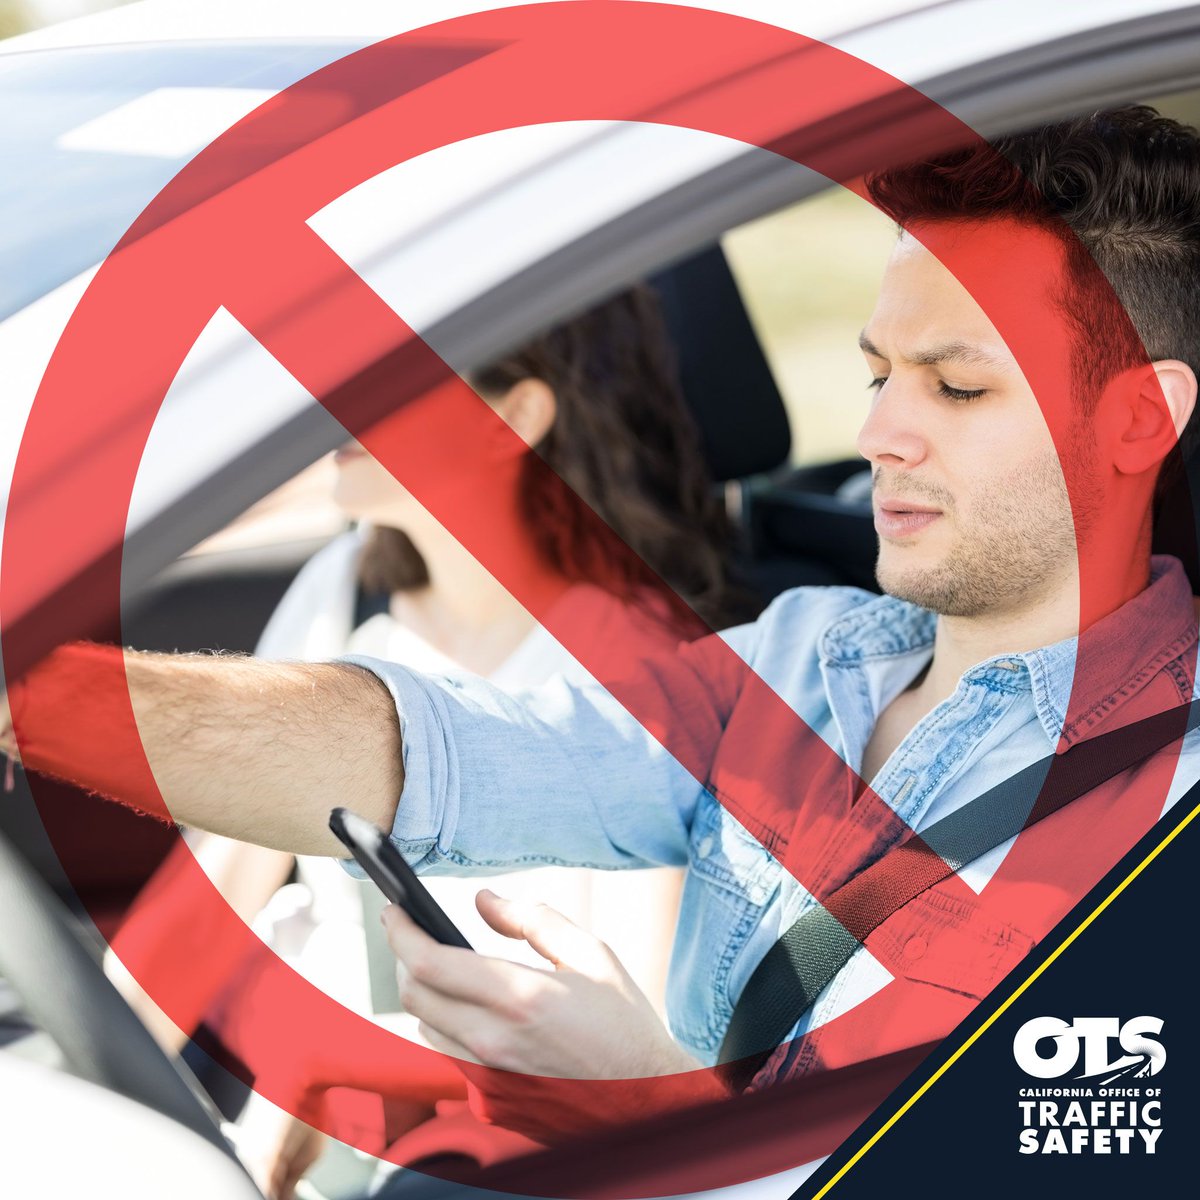 The 'U drive. U text. U Pay.' campaign is a nationwide effort this month to enforce cell phone laws and raise awareness about the dangers of distracted driving. #JustDriveCA #NationalDistractedDrivingAwarenessMonth